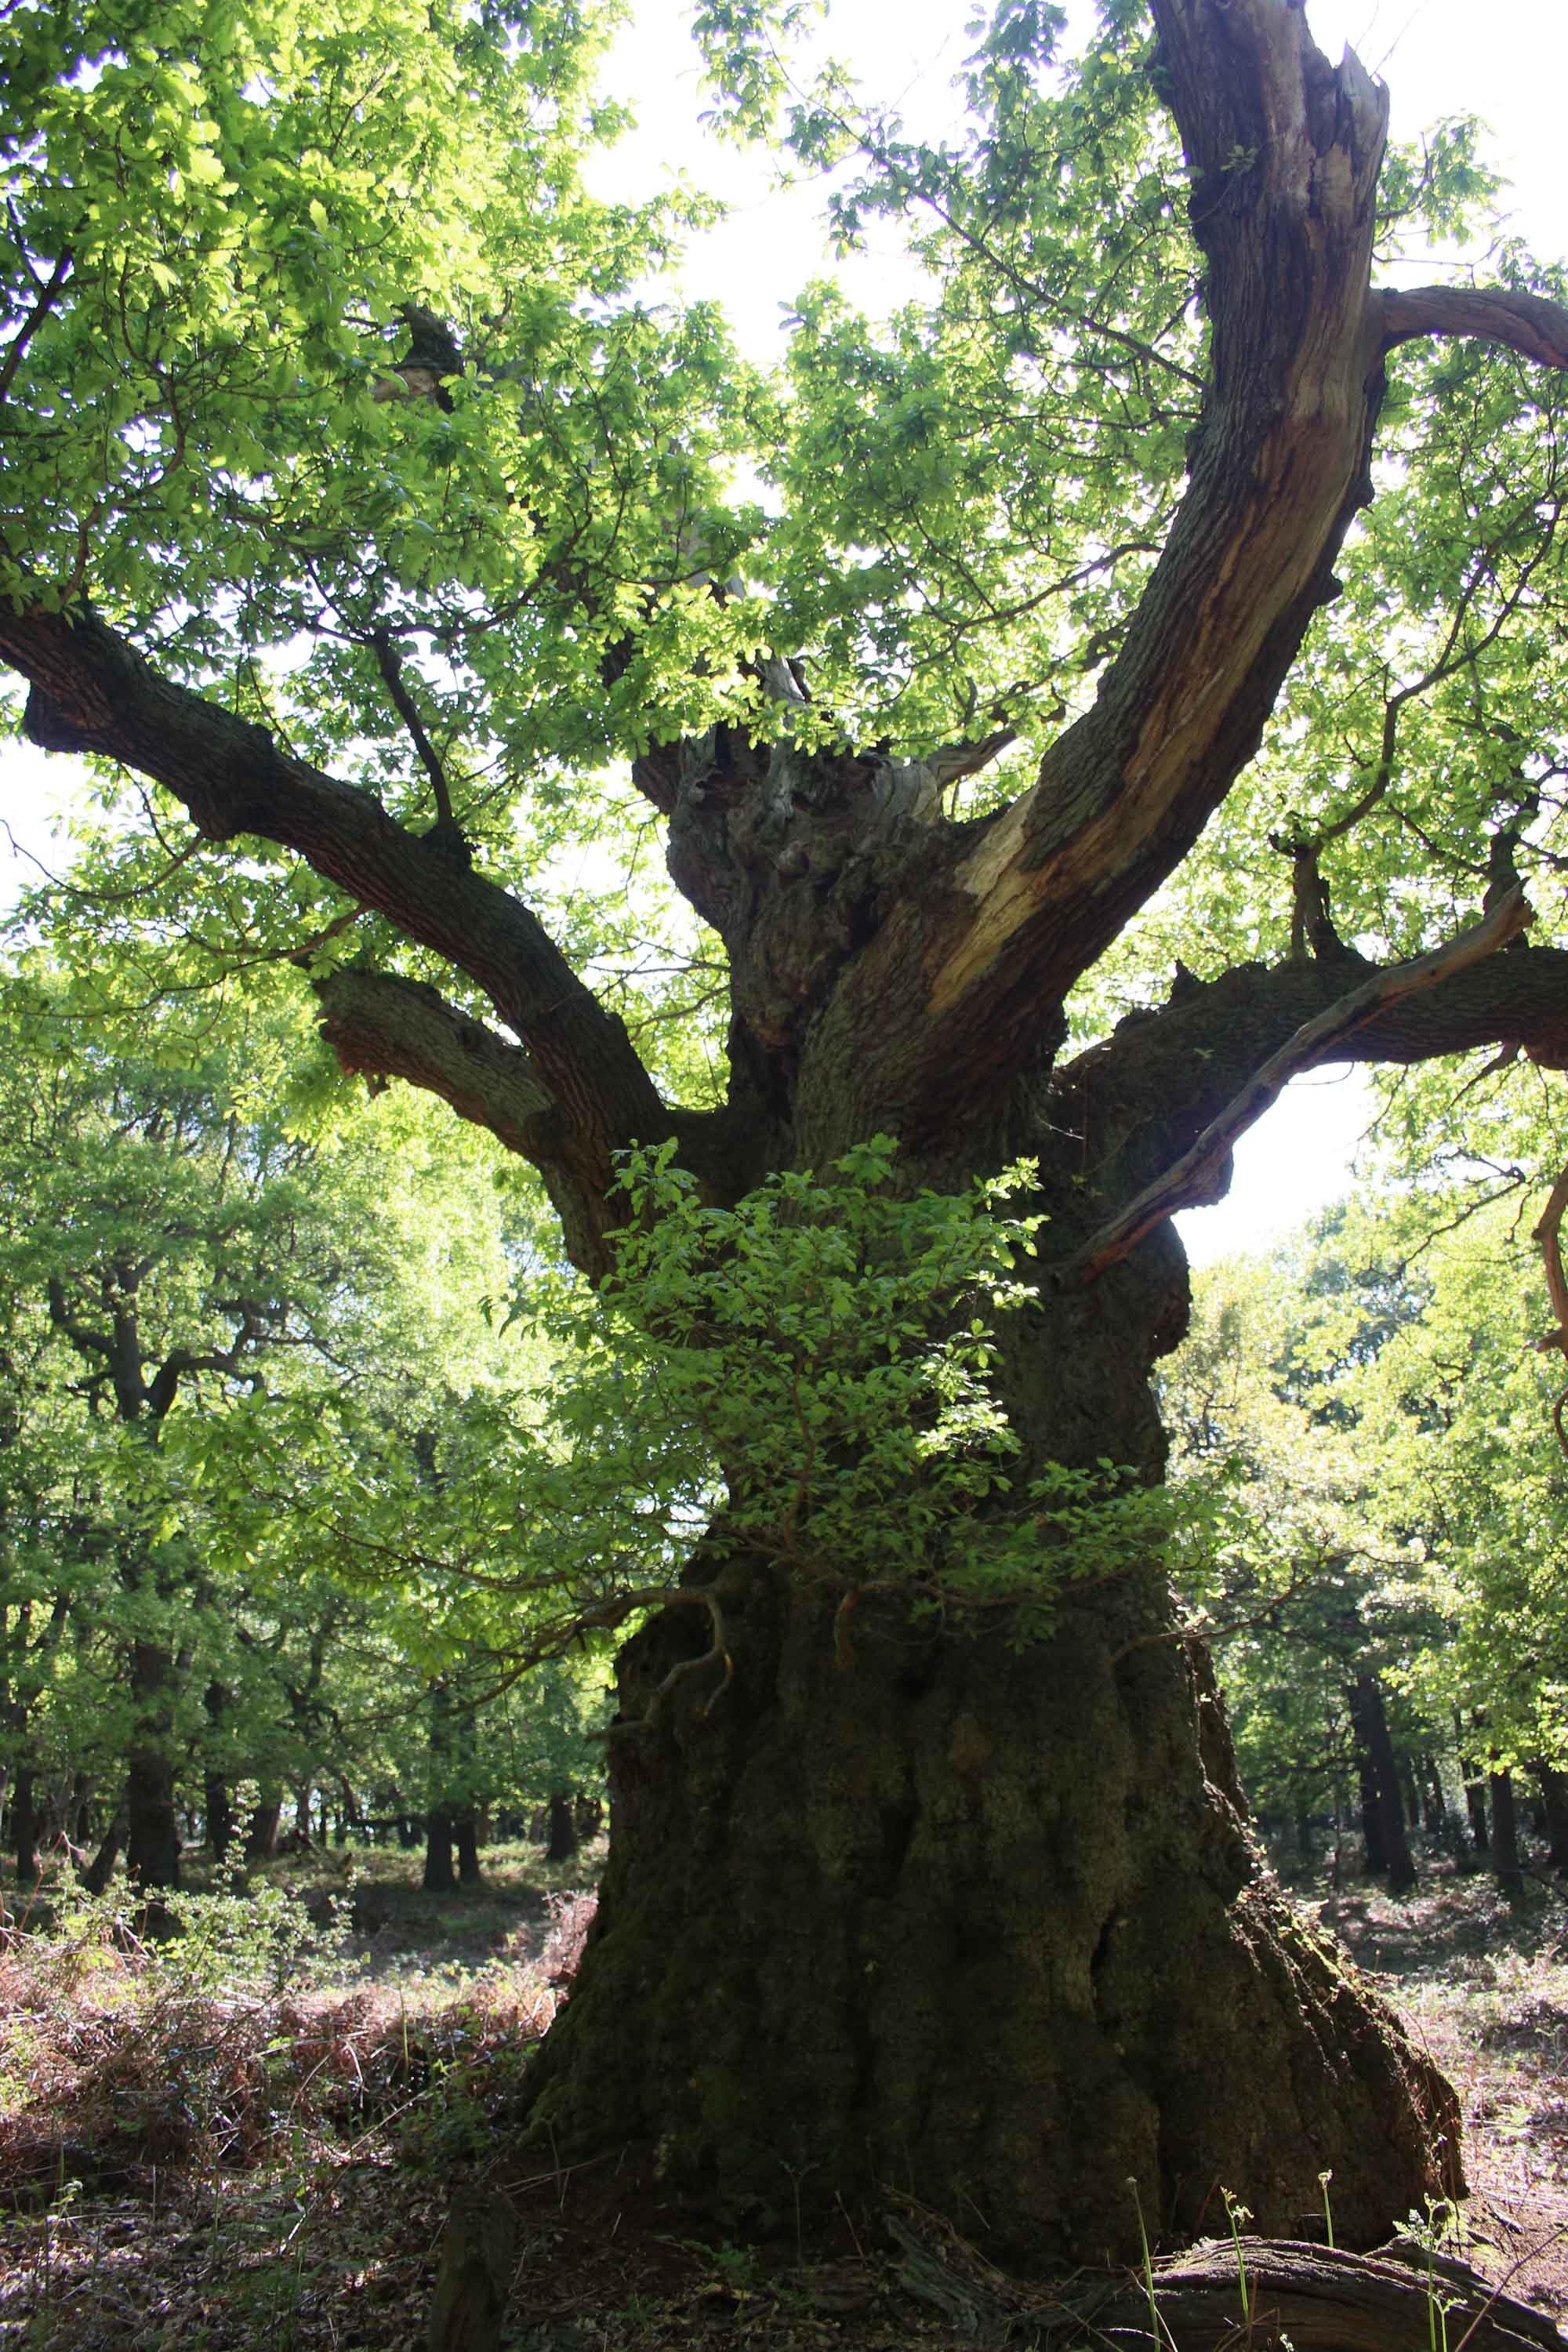 A spectacular sessile oak recorded by Helen Leaf, measuring at 7.47m girth (Tree ID 193006).